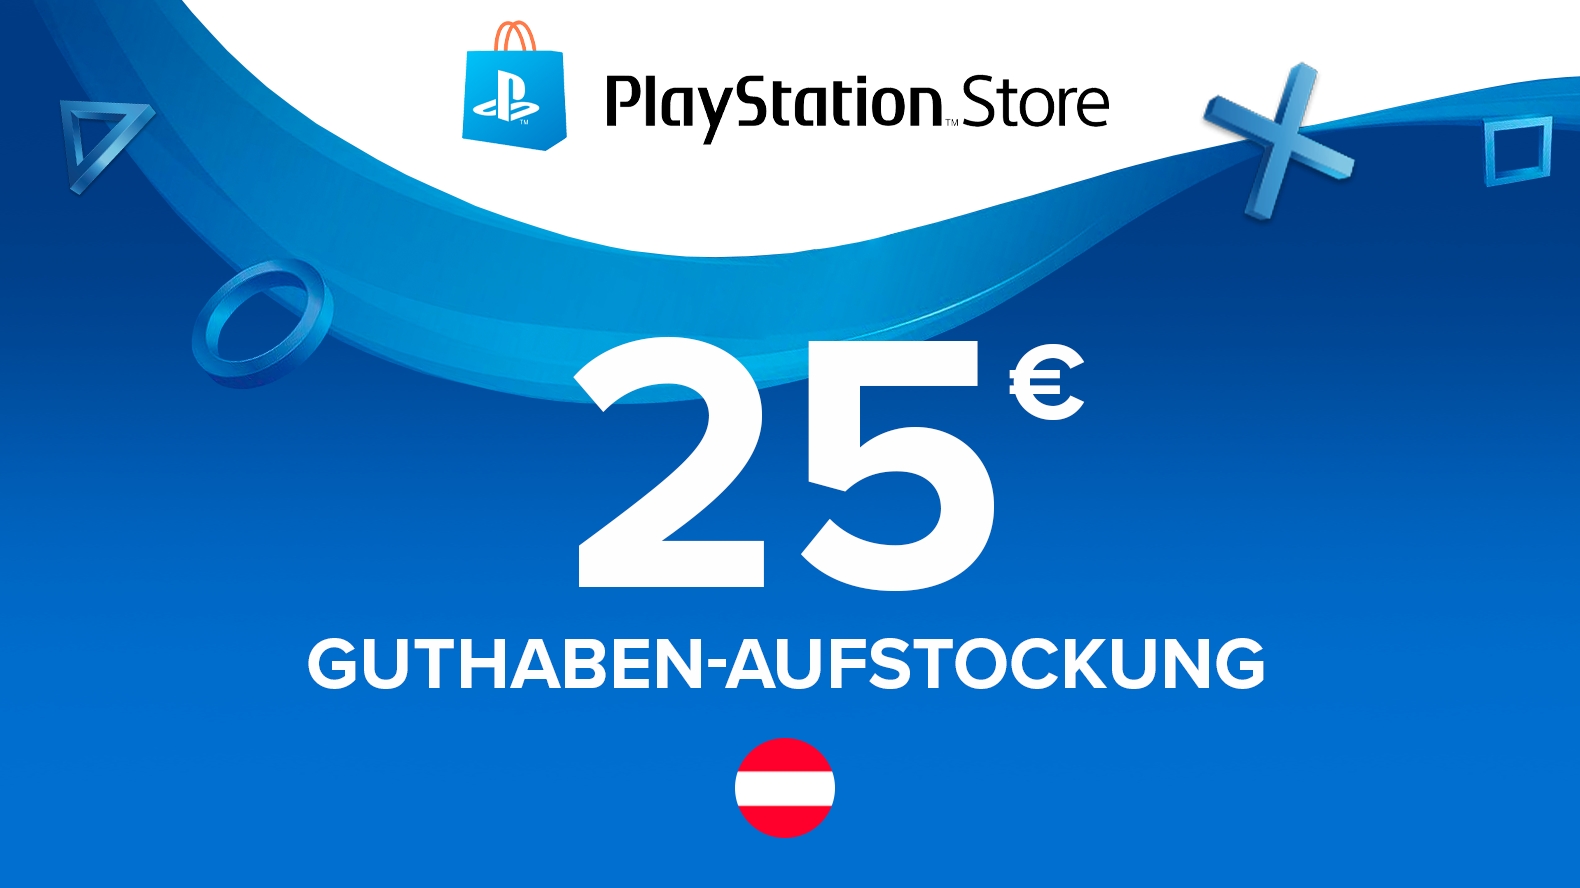 25 ps4 gift card